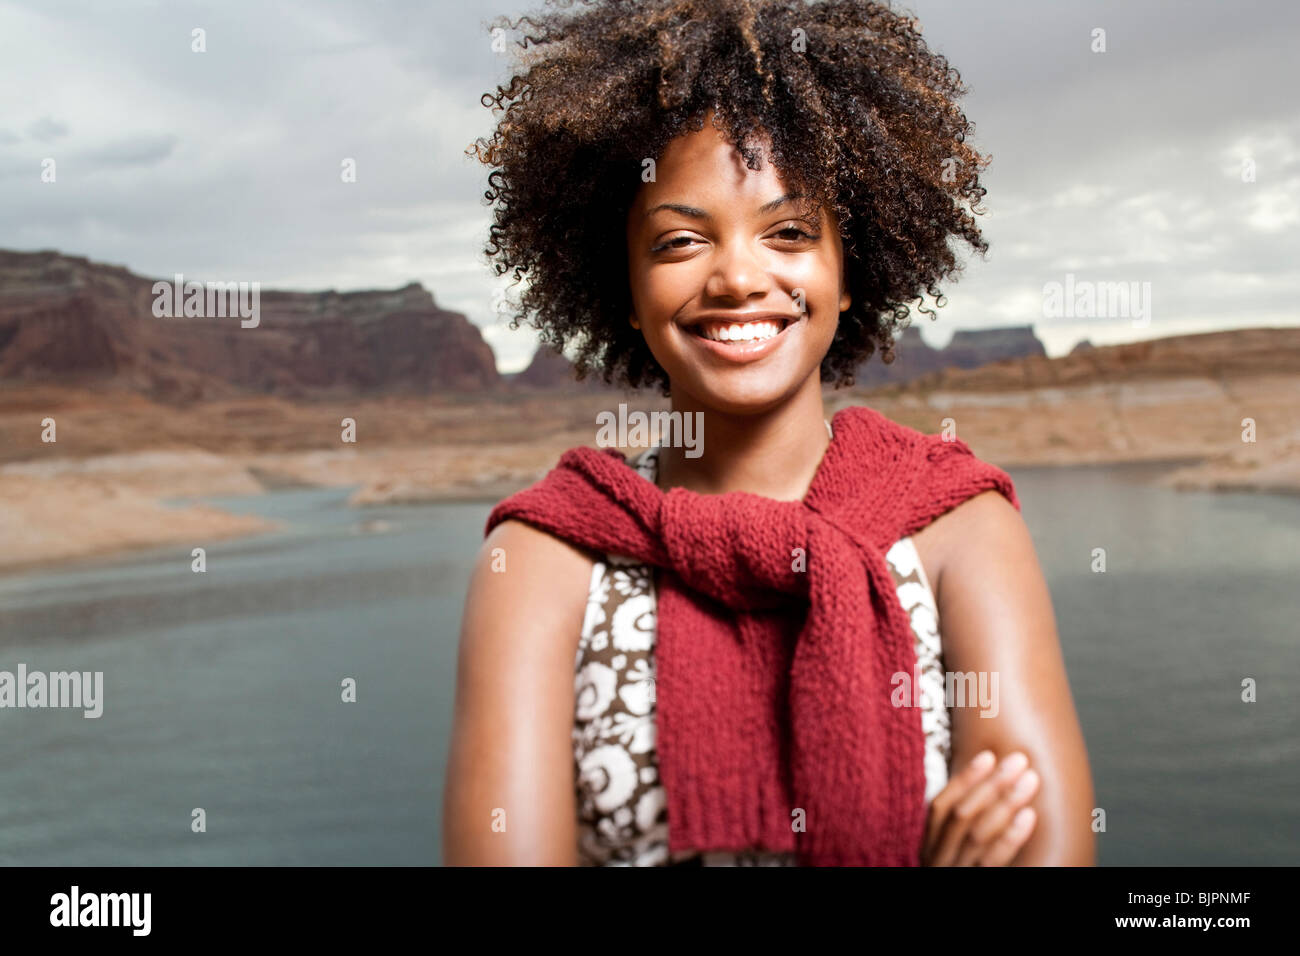 Woman with scenic background Stock Photo